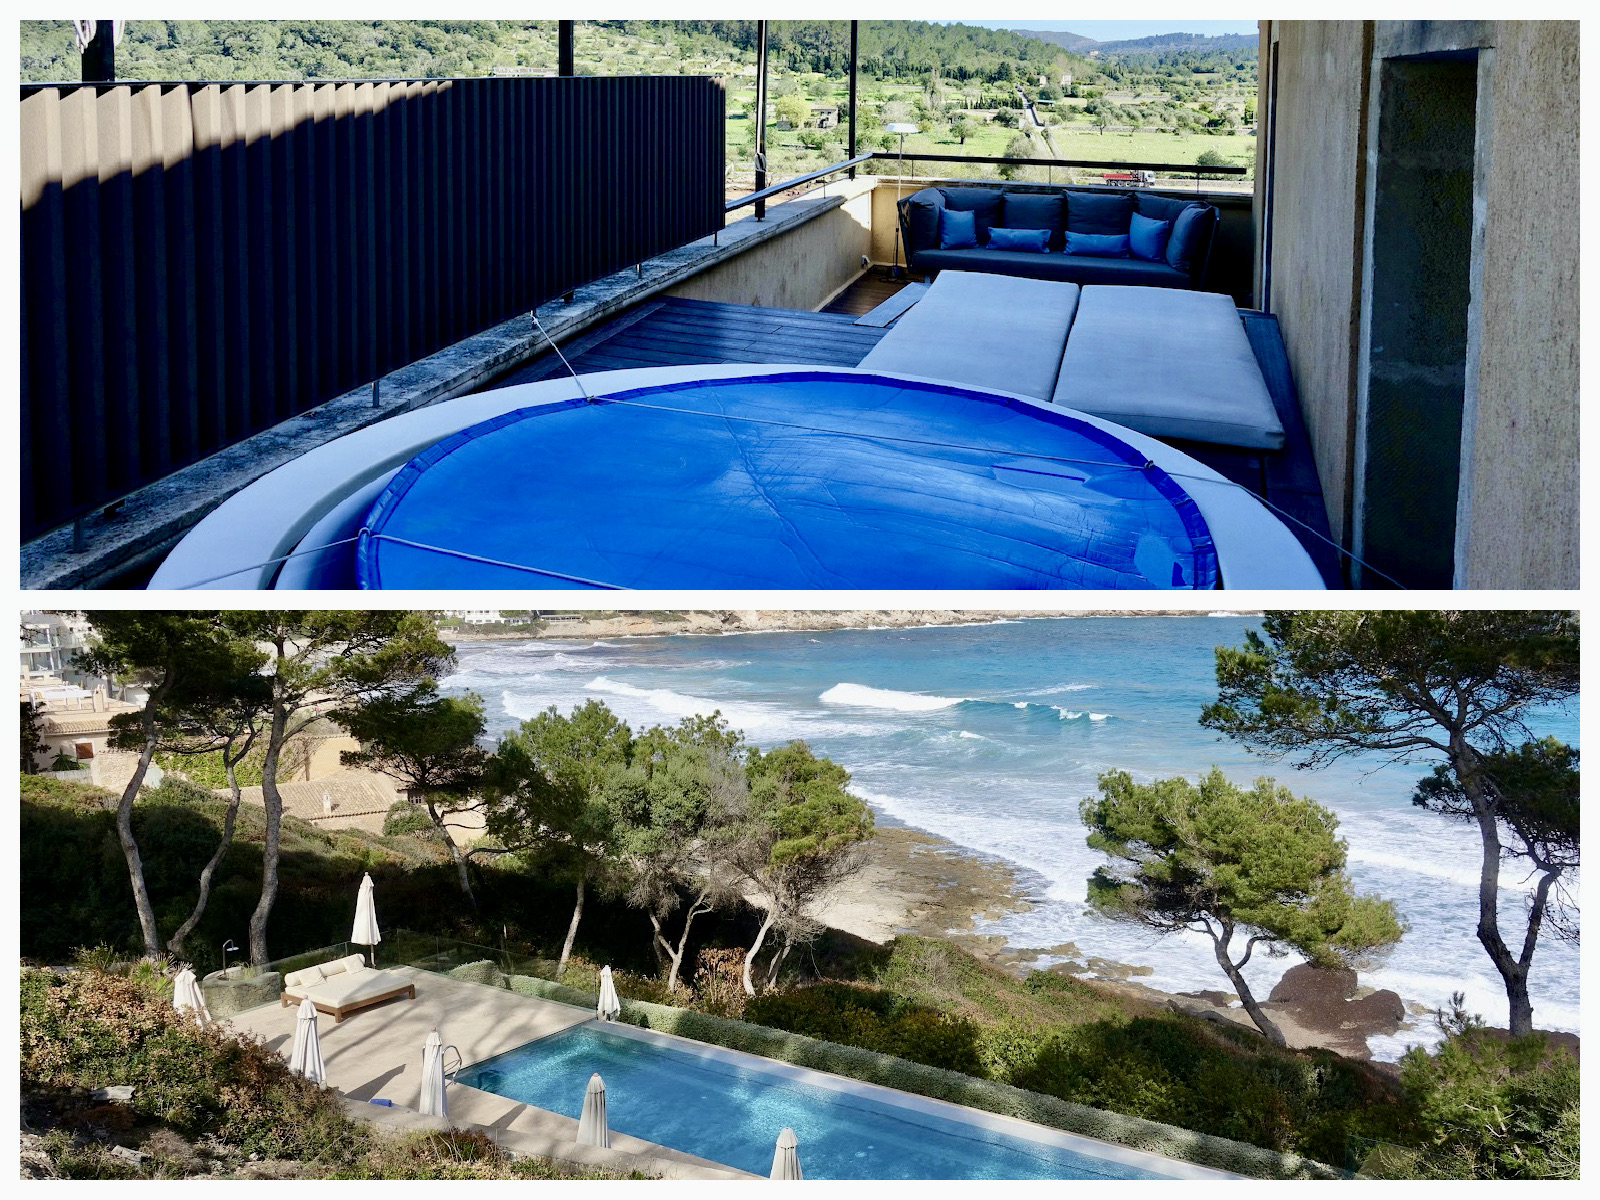 two luxury hotels in Mallorca/Spain: Son Brull (top) & Can Simoneta (below)